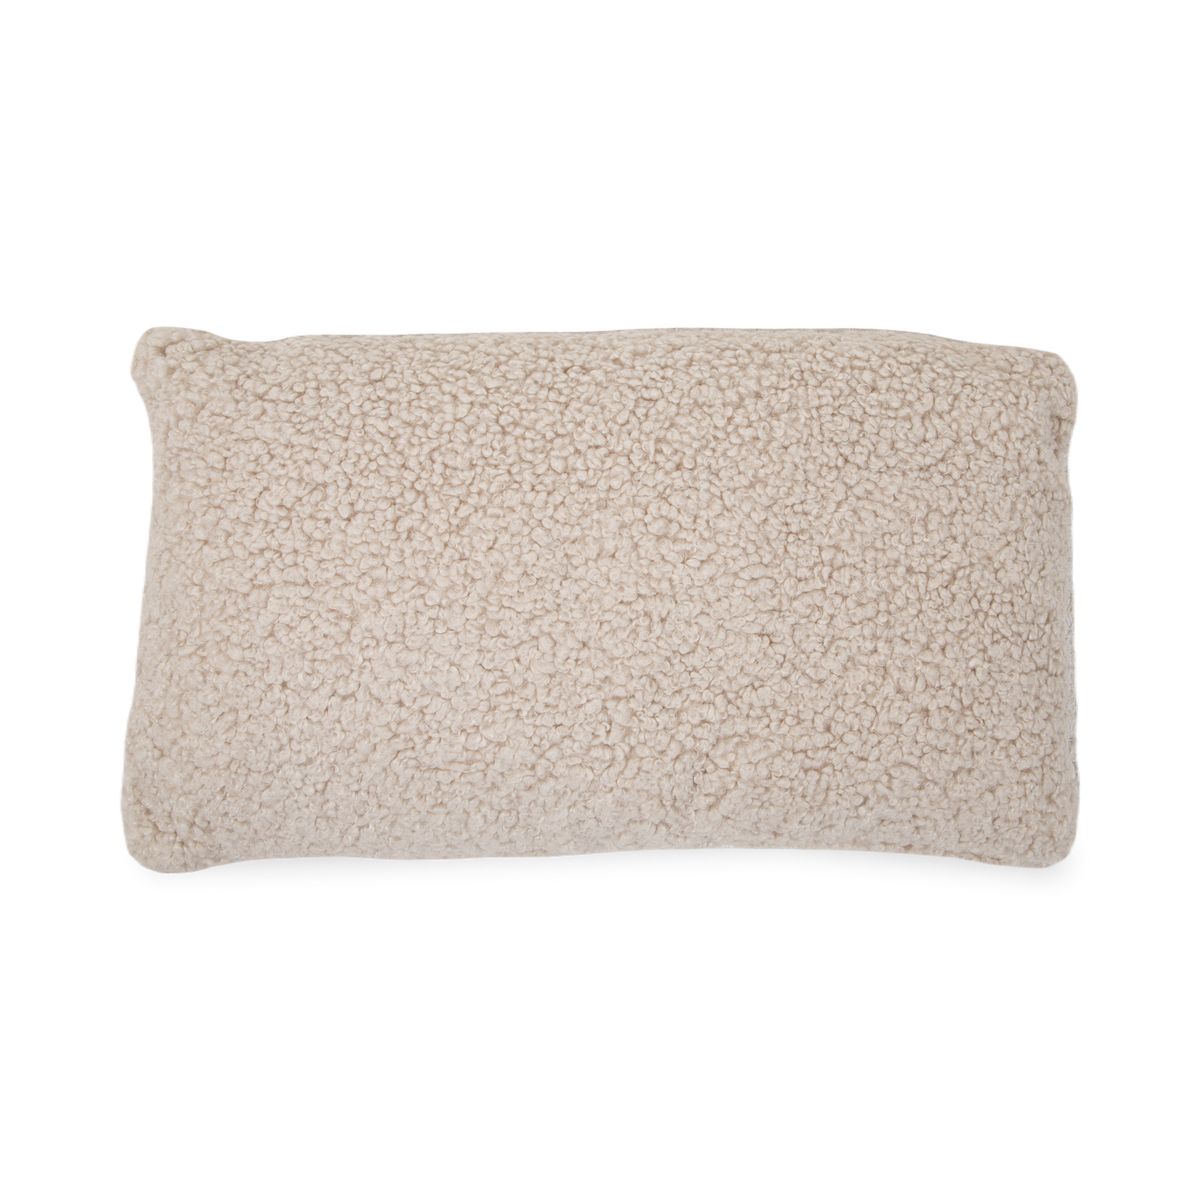 More cozy then it looks, the Sheepskin Pillow features a neutral beige tone on a soft faux sheepskin polyester.